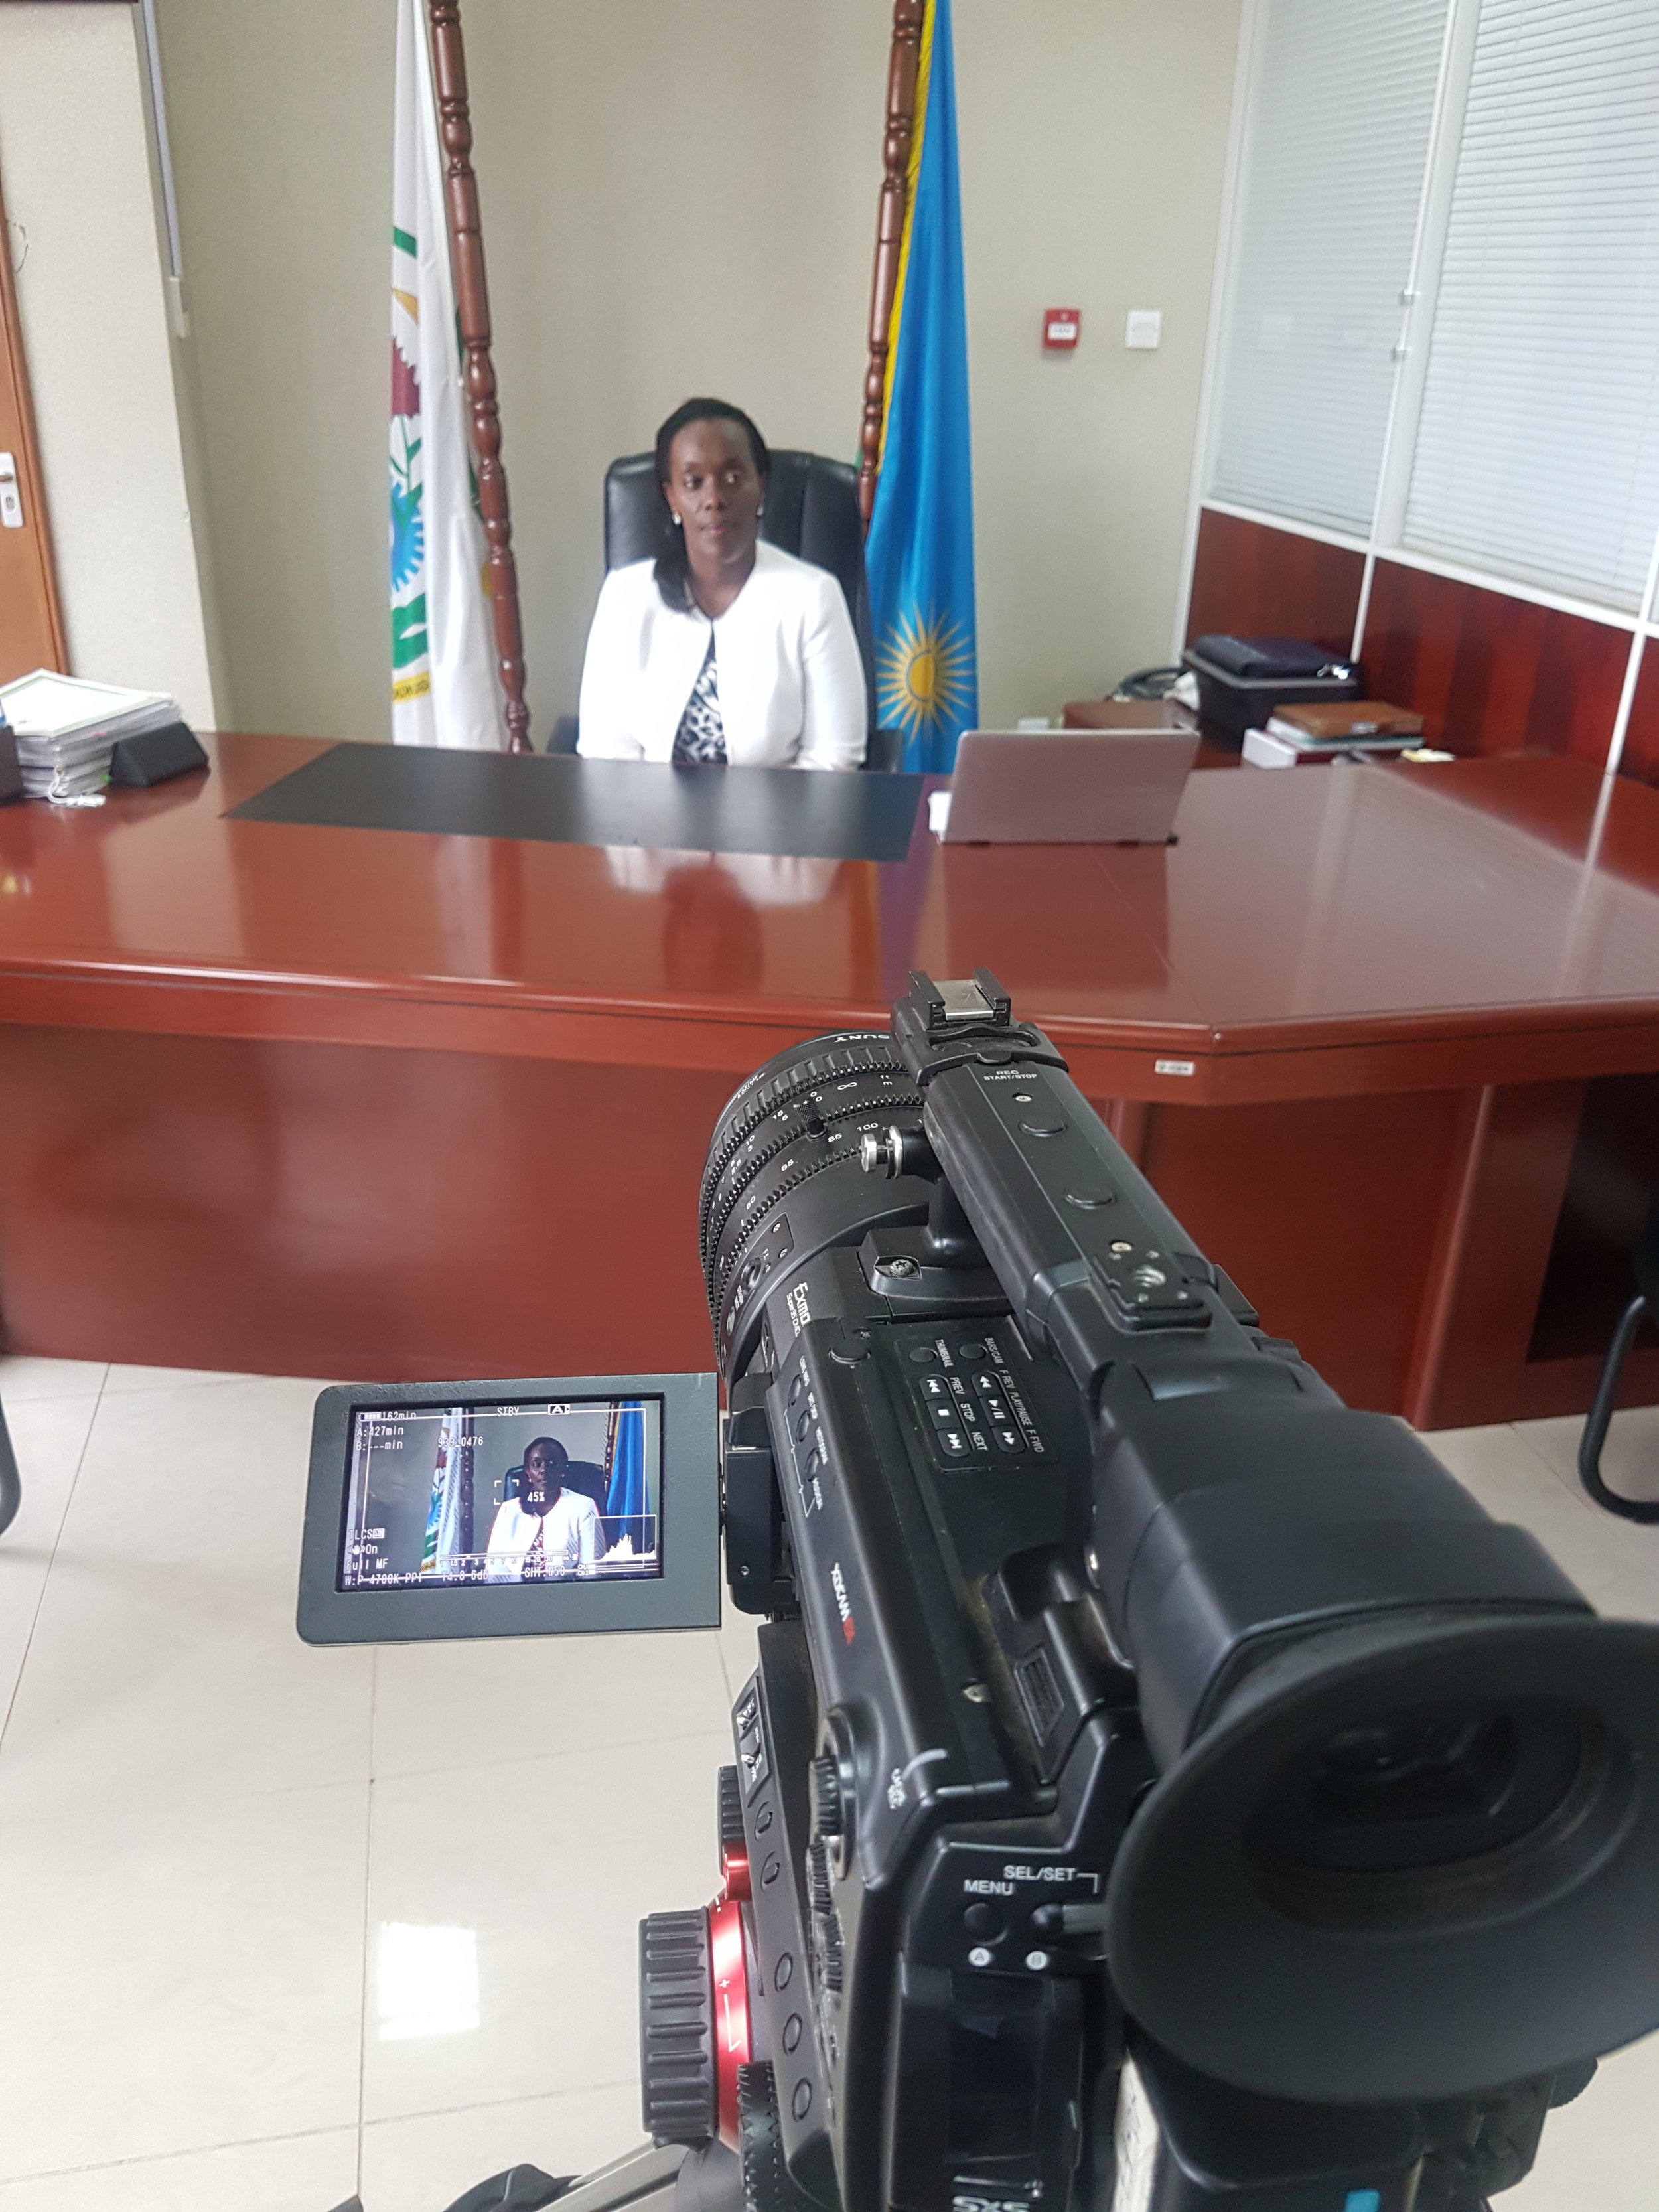 The Sony PMWF3 with zoom lens capturing the interview with the Minister Of Health, Dr. Diane GASHUMBA.